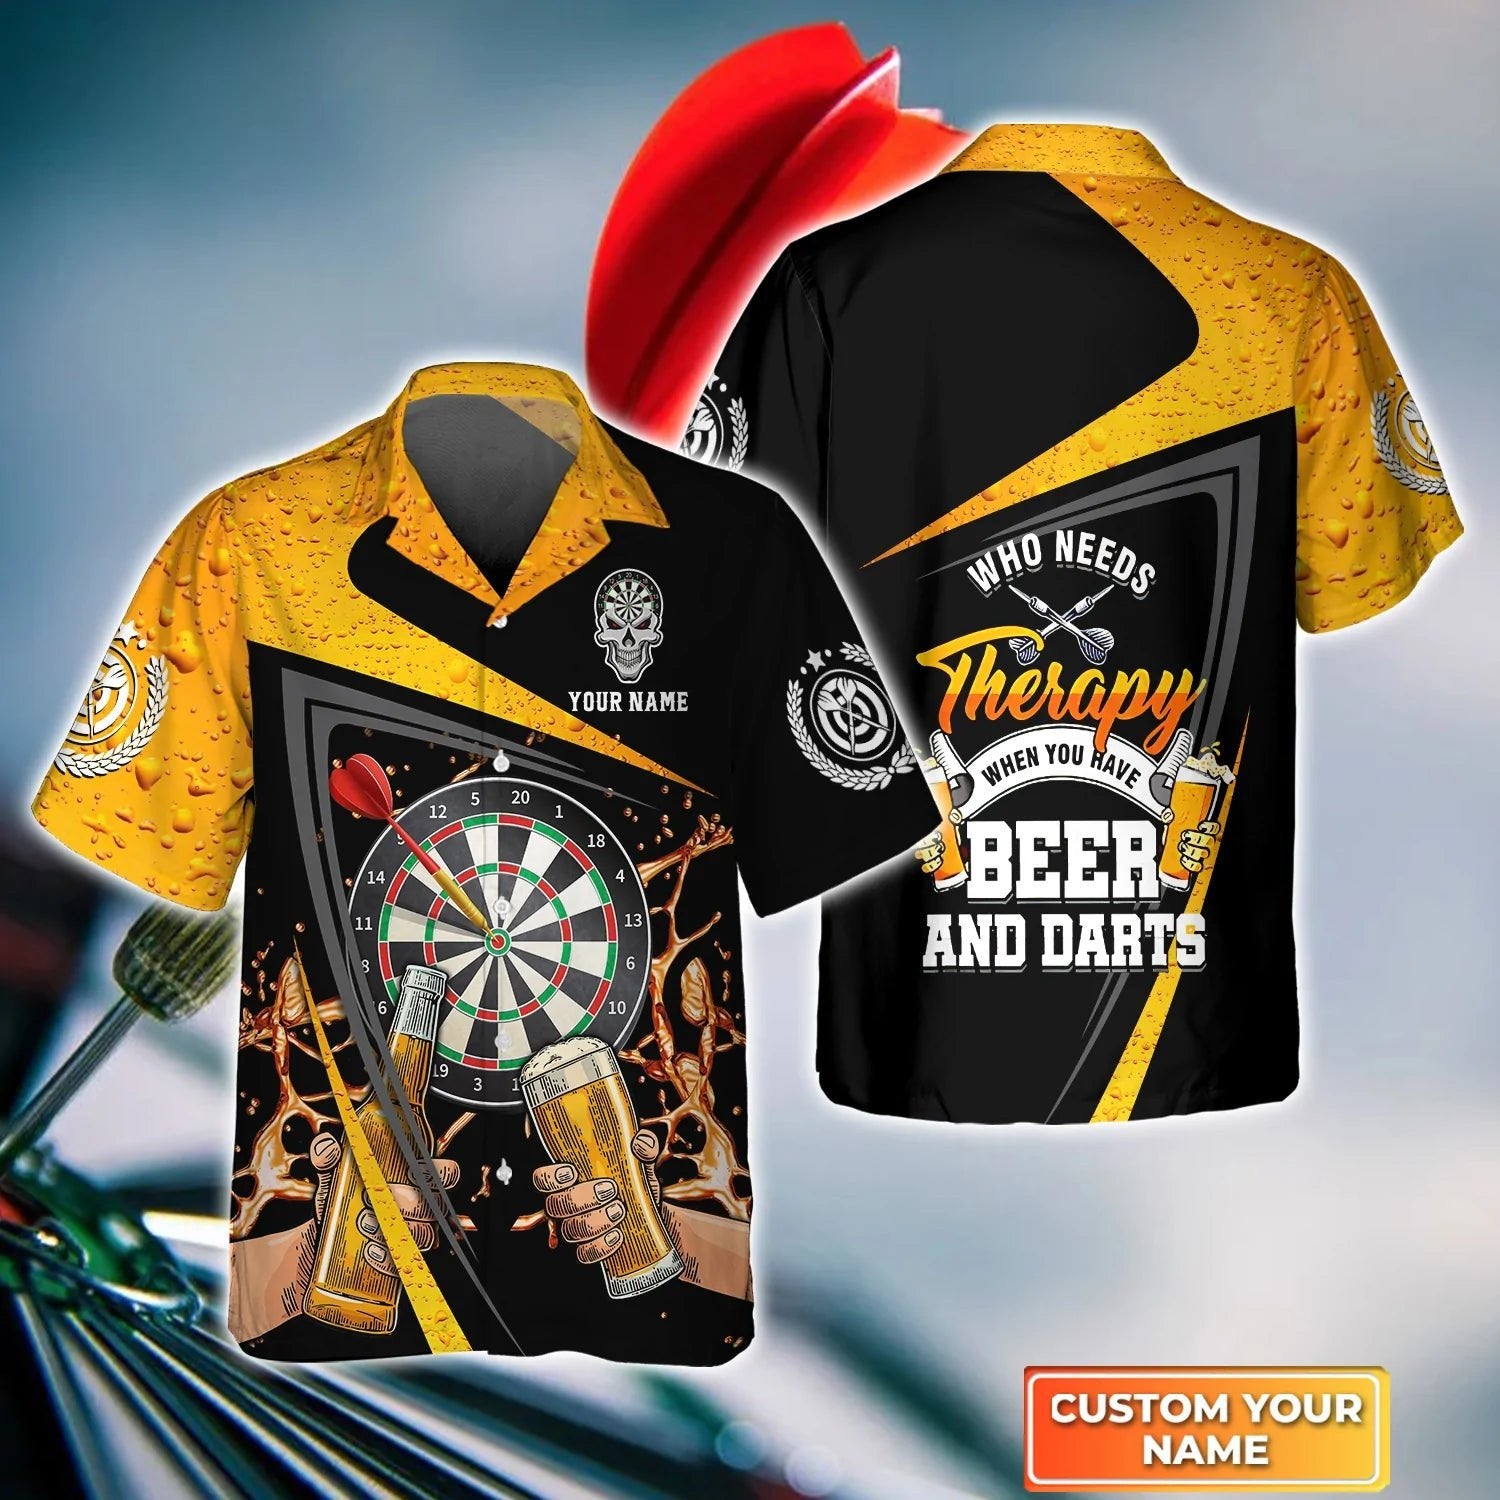 Just Want To Drink Beer And Play Darts. Personalized Name 3D Hawaiian Shirt